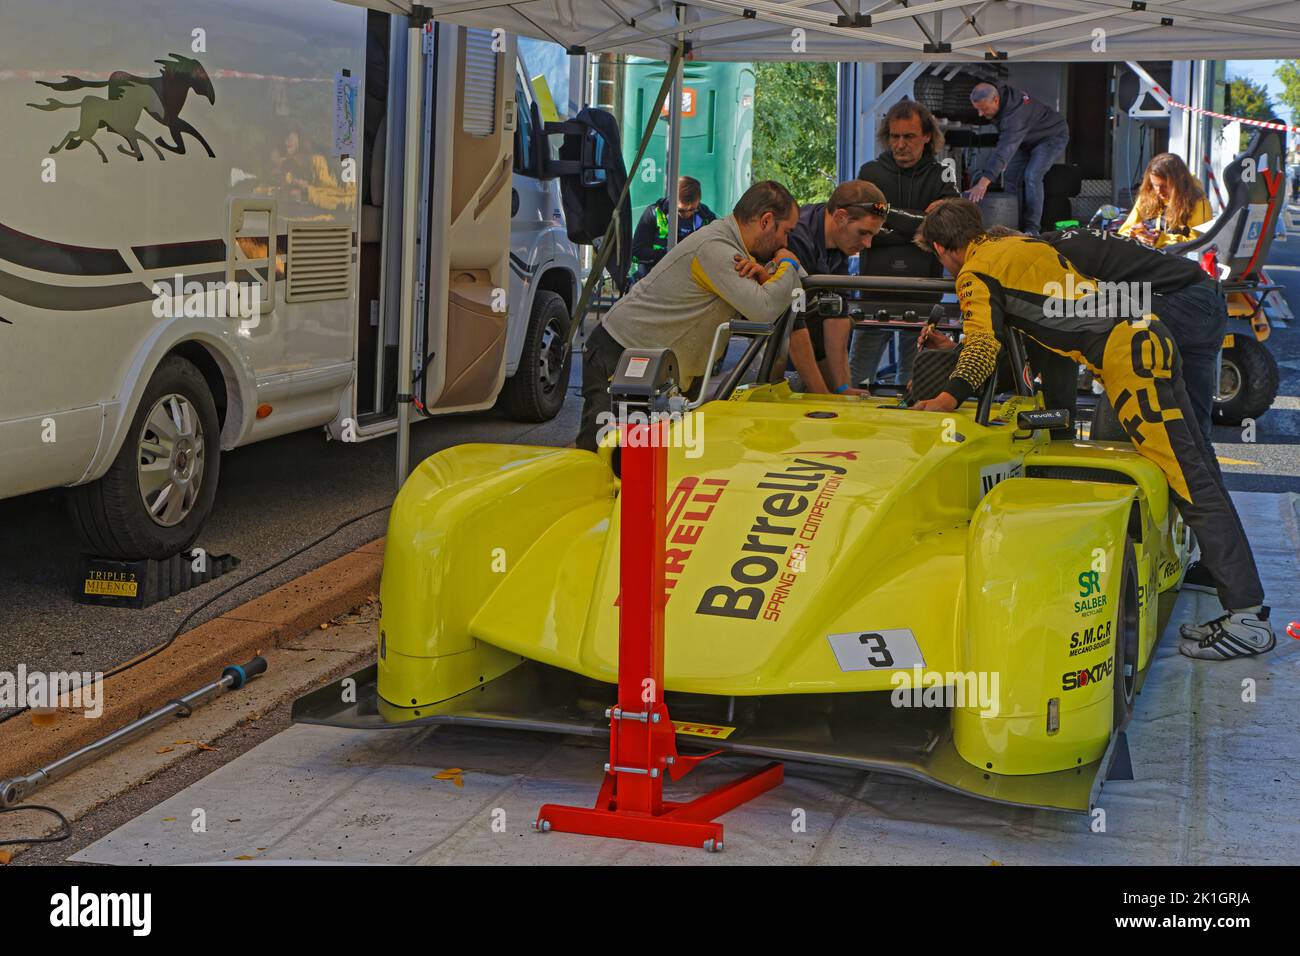 LIMONEST, FRANCE, September 17, 2022 : Teams install themselves on the side of the streets in the village for the annual uphill car race, counting for Stock Photo